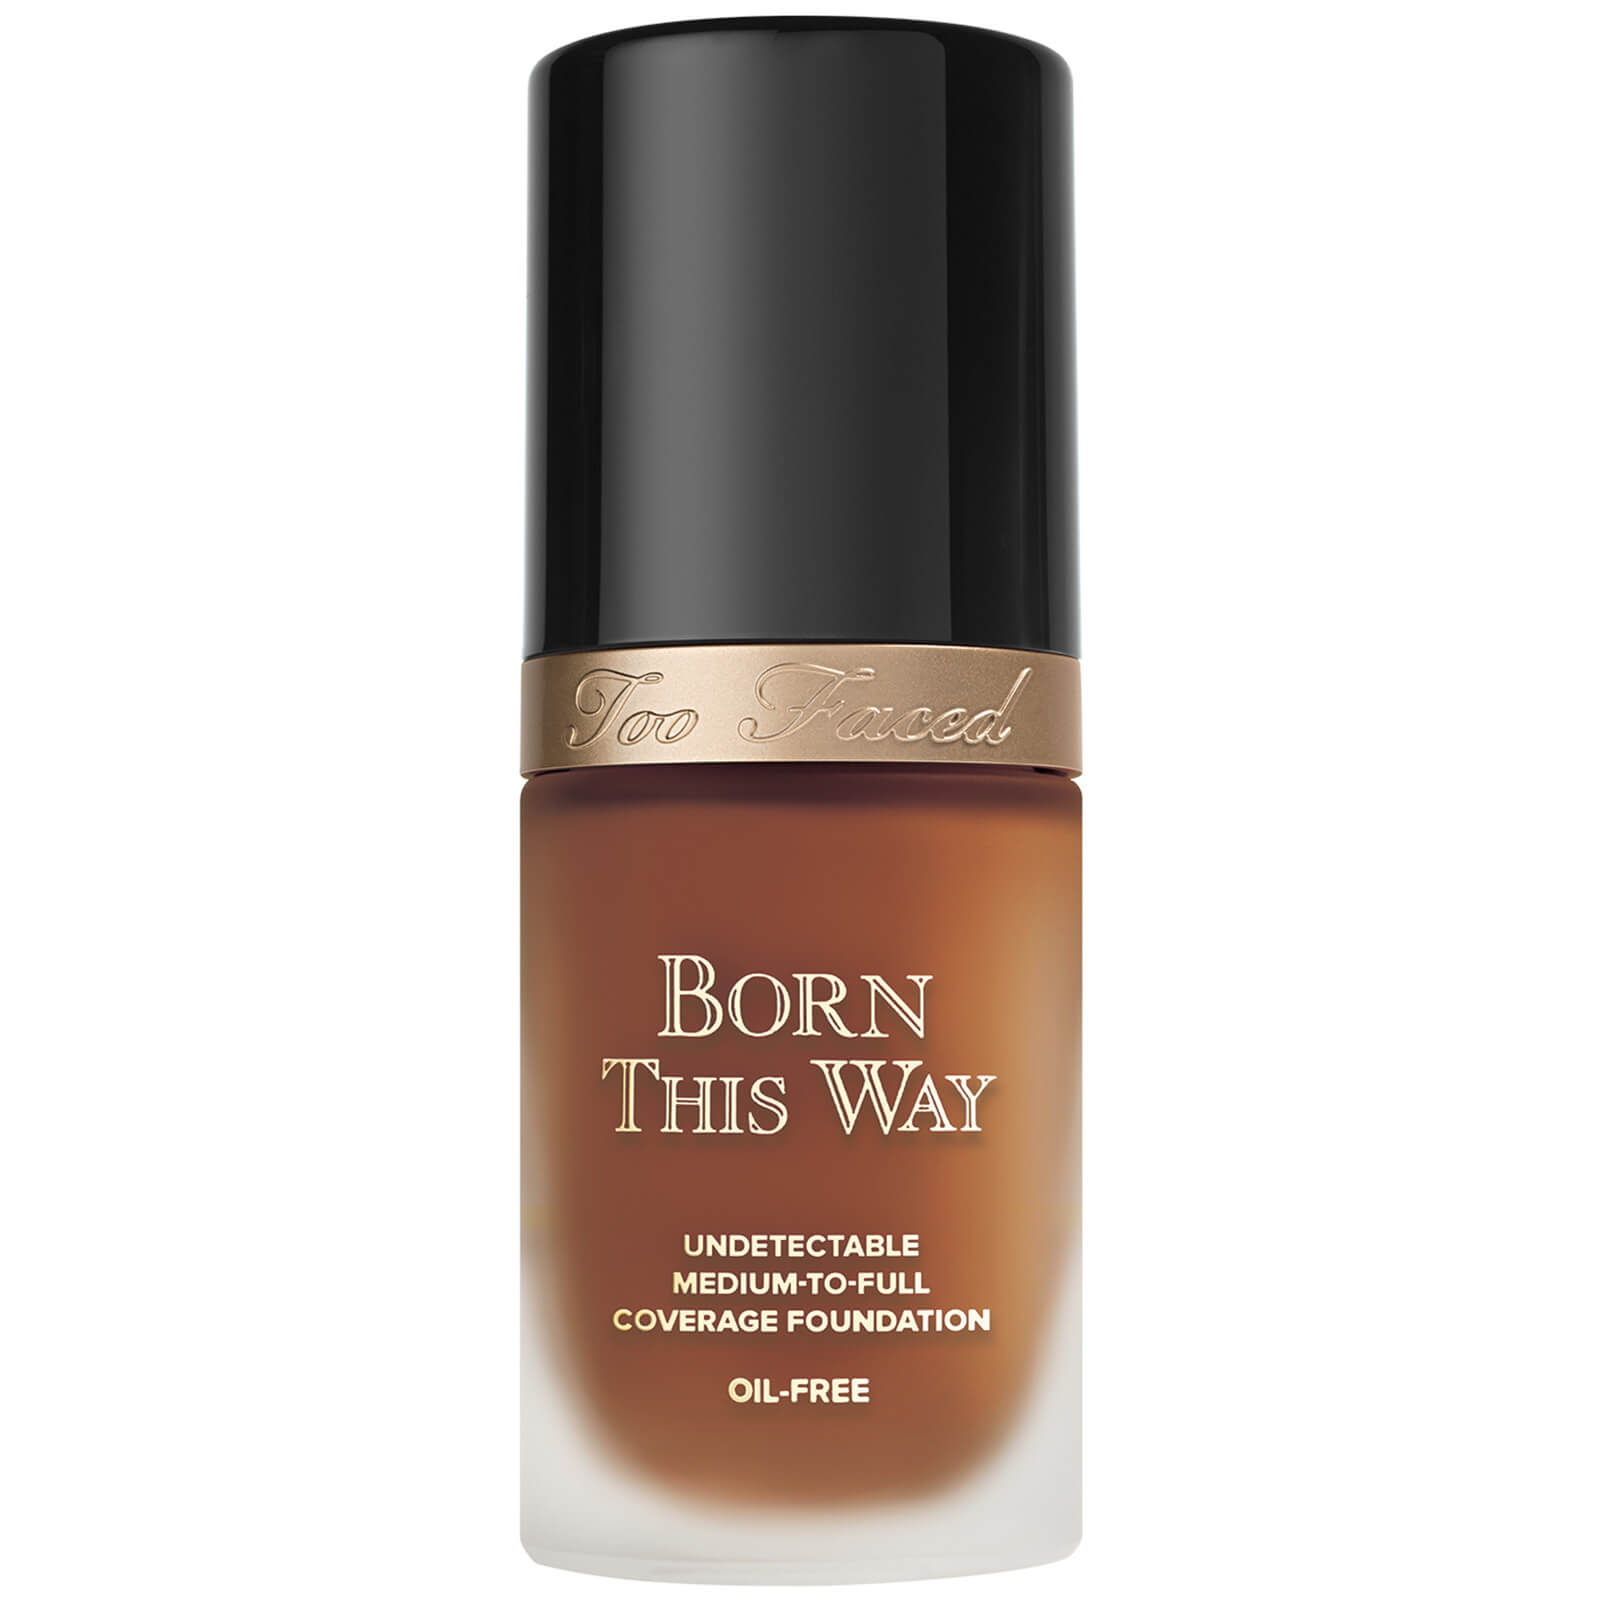 Photos - Foundation & Concealer Too Faced Born This Way Foundation 30ml  - Spiced Rum (Various Shades)